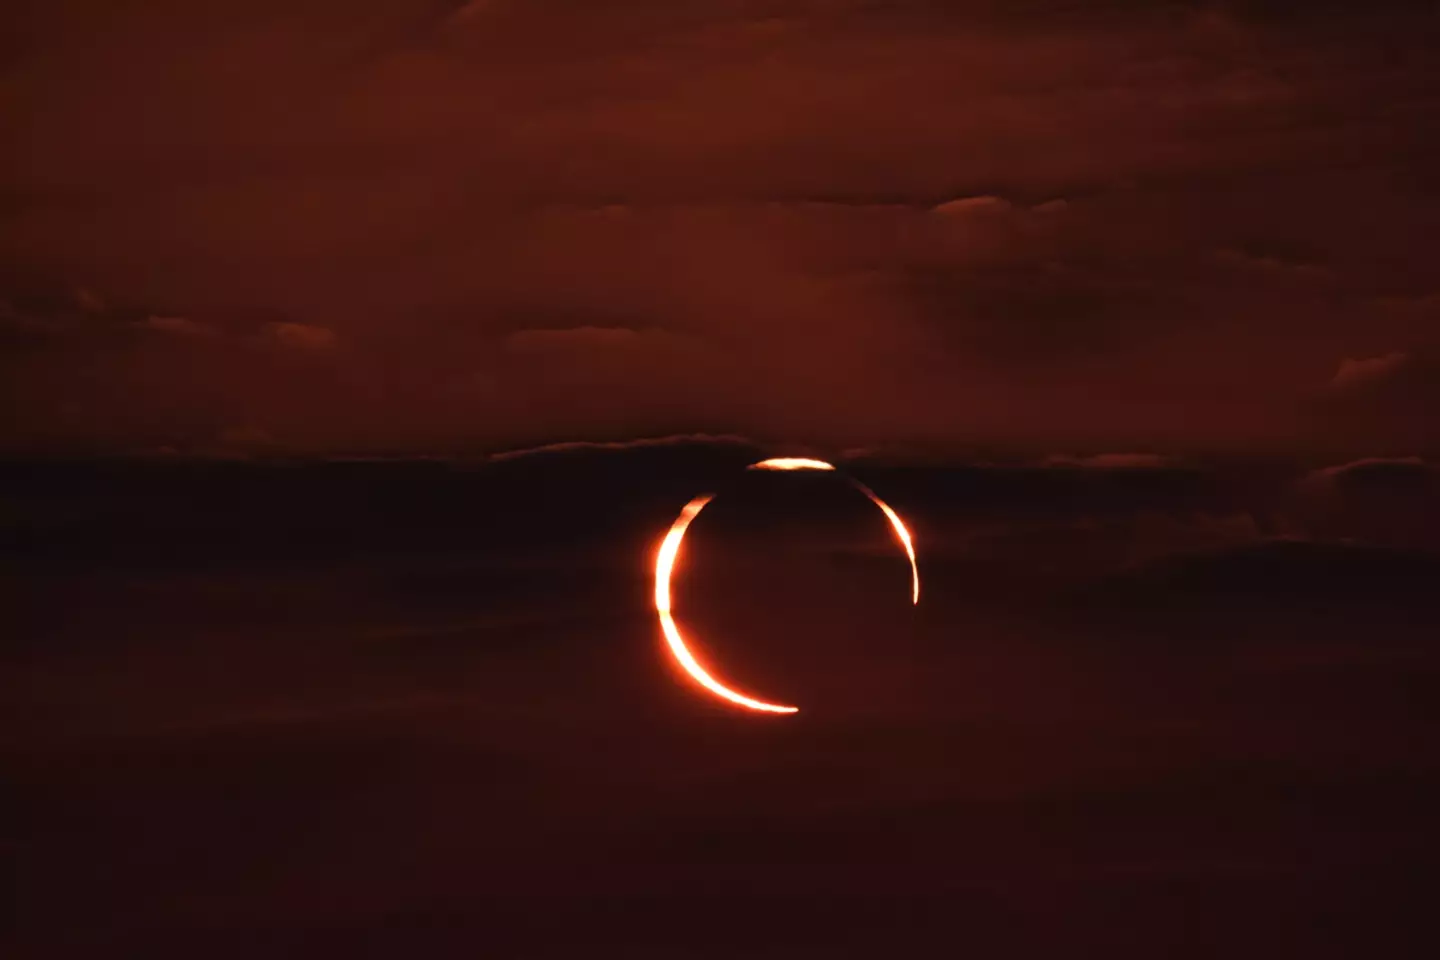 The 'ring of fire' marks the first time in 11 years that an annular solar eclipse has been visible in North America.